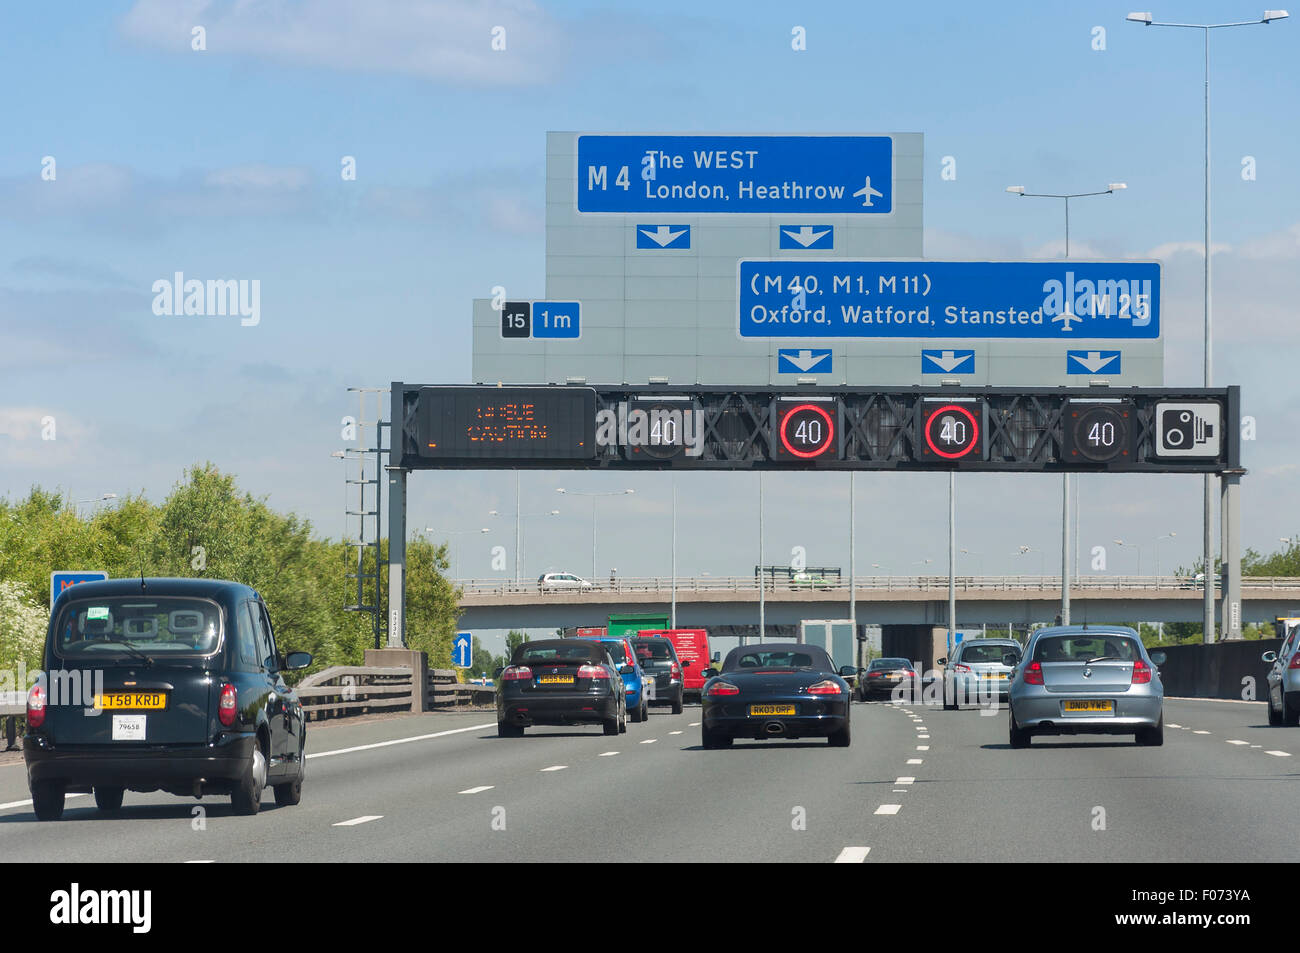 M4 Junction on M25 Motorway showing speed restrictions, Surrey, England, United Kingdom Stock Photo